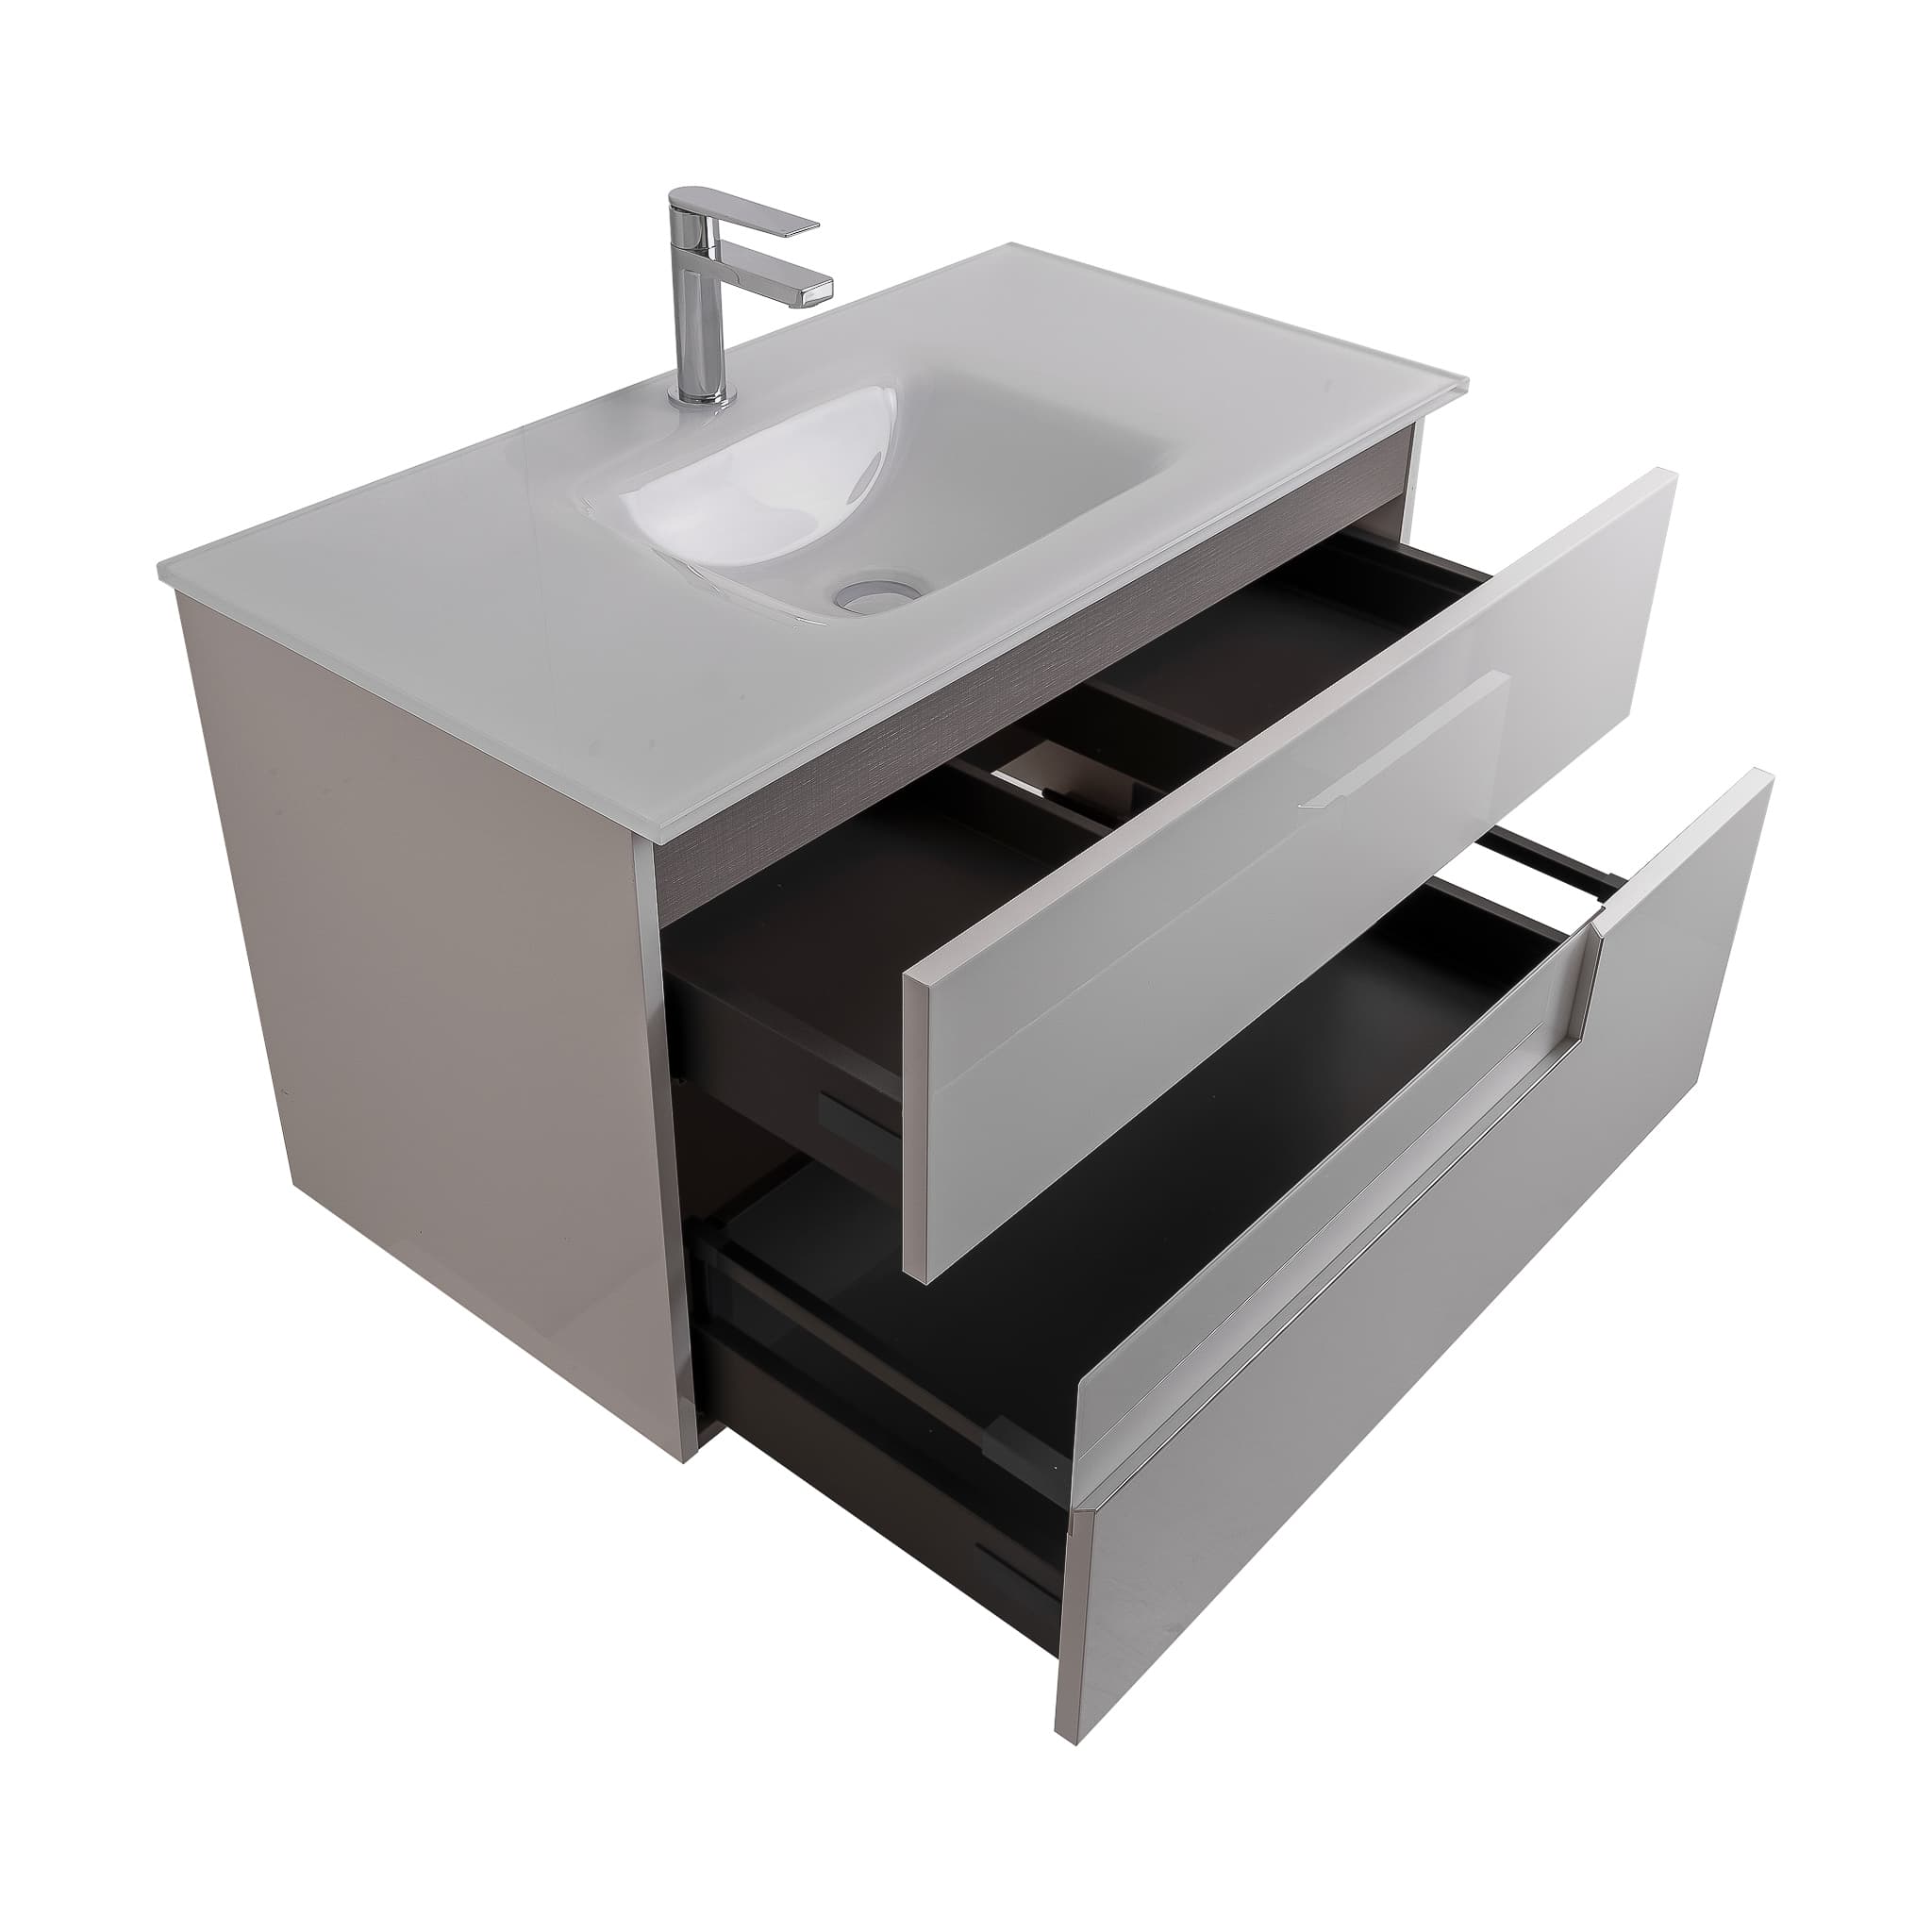 Vision 39.5 White High Gloss Cabinet, White Tempered Glass Sink, Wall Mounted Modern Vanity Set